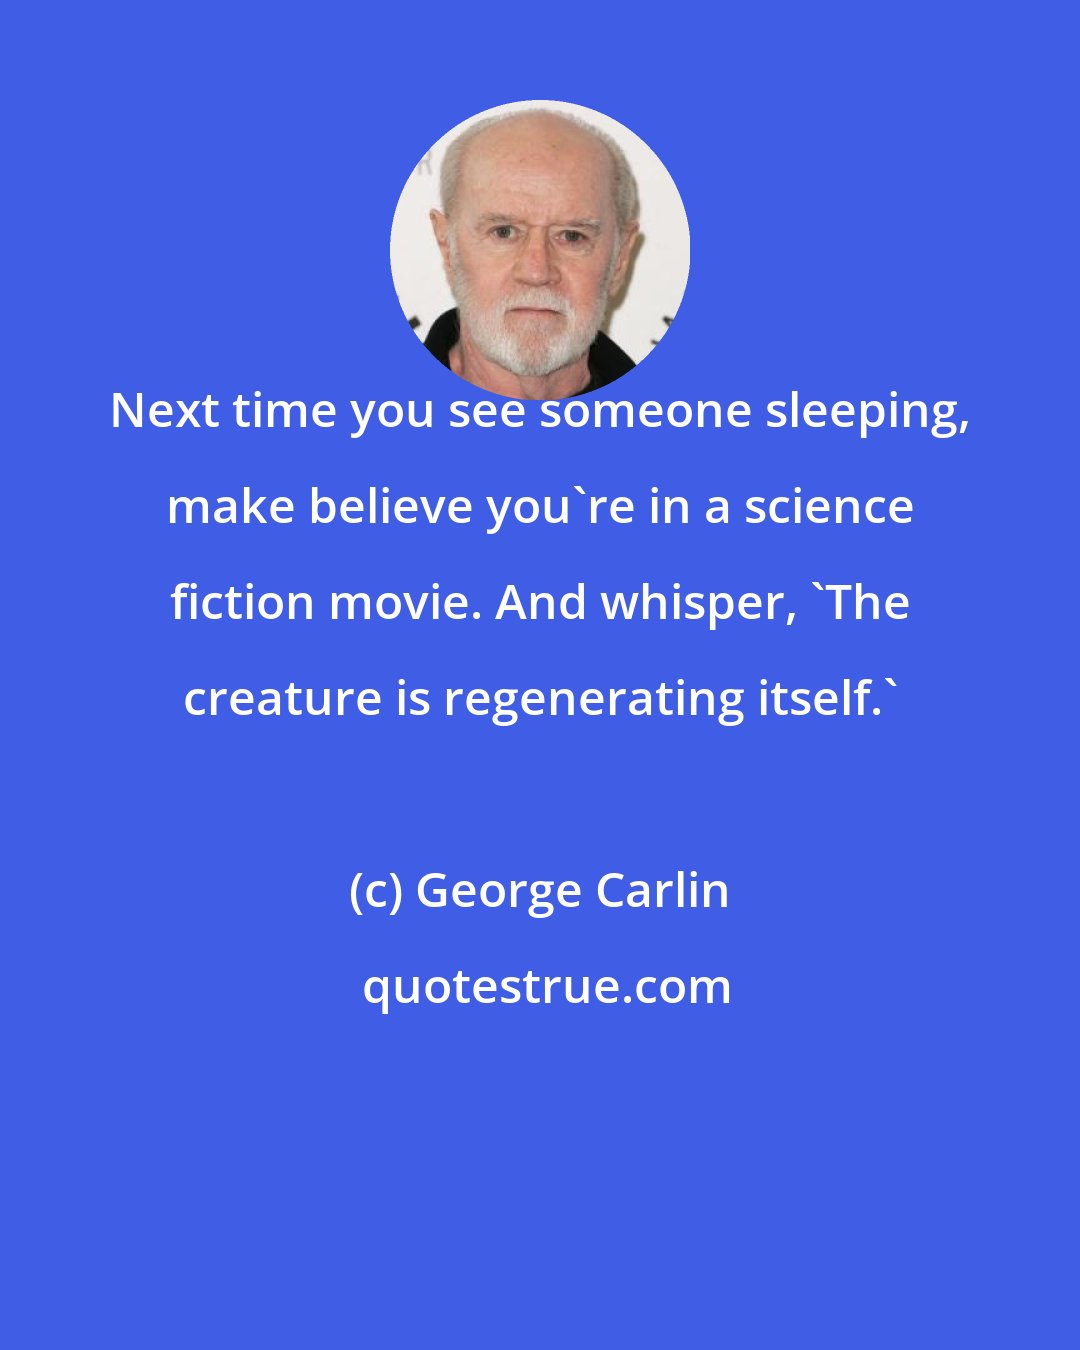 George Carlin: Next time you see someone sleeping, make believe you're in a science fiction movie. And whisper, 'The creature is regenerating itself.'